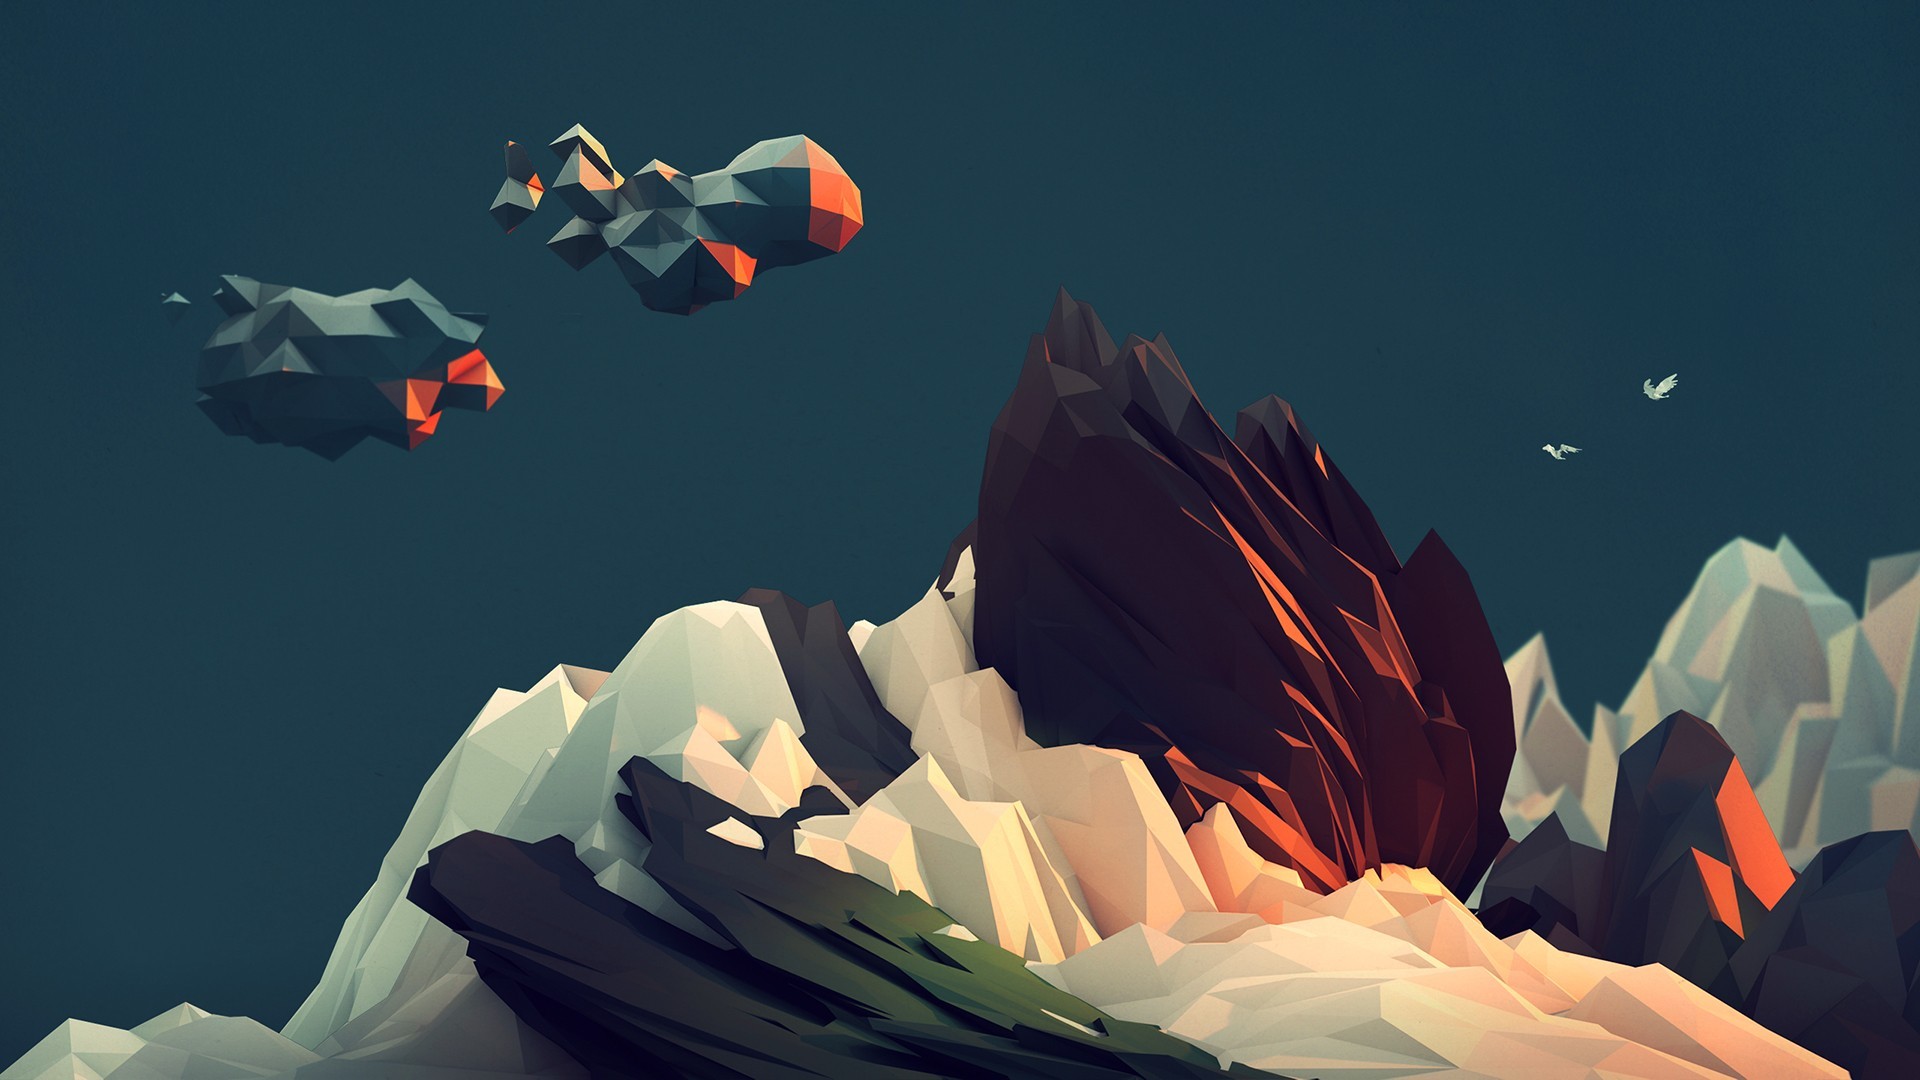 1920x1080 Abstract polygon mountain wallpaper polygon art geometric shapes mountains  rocks clouds sky minimalist low-poly wallpapers digital illustration design  ...